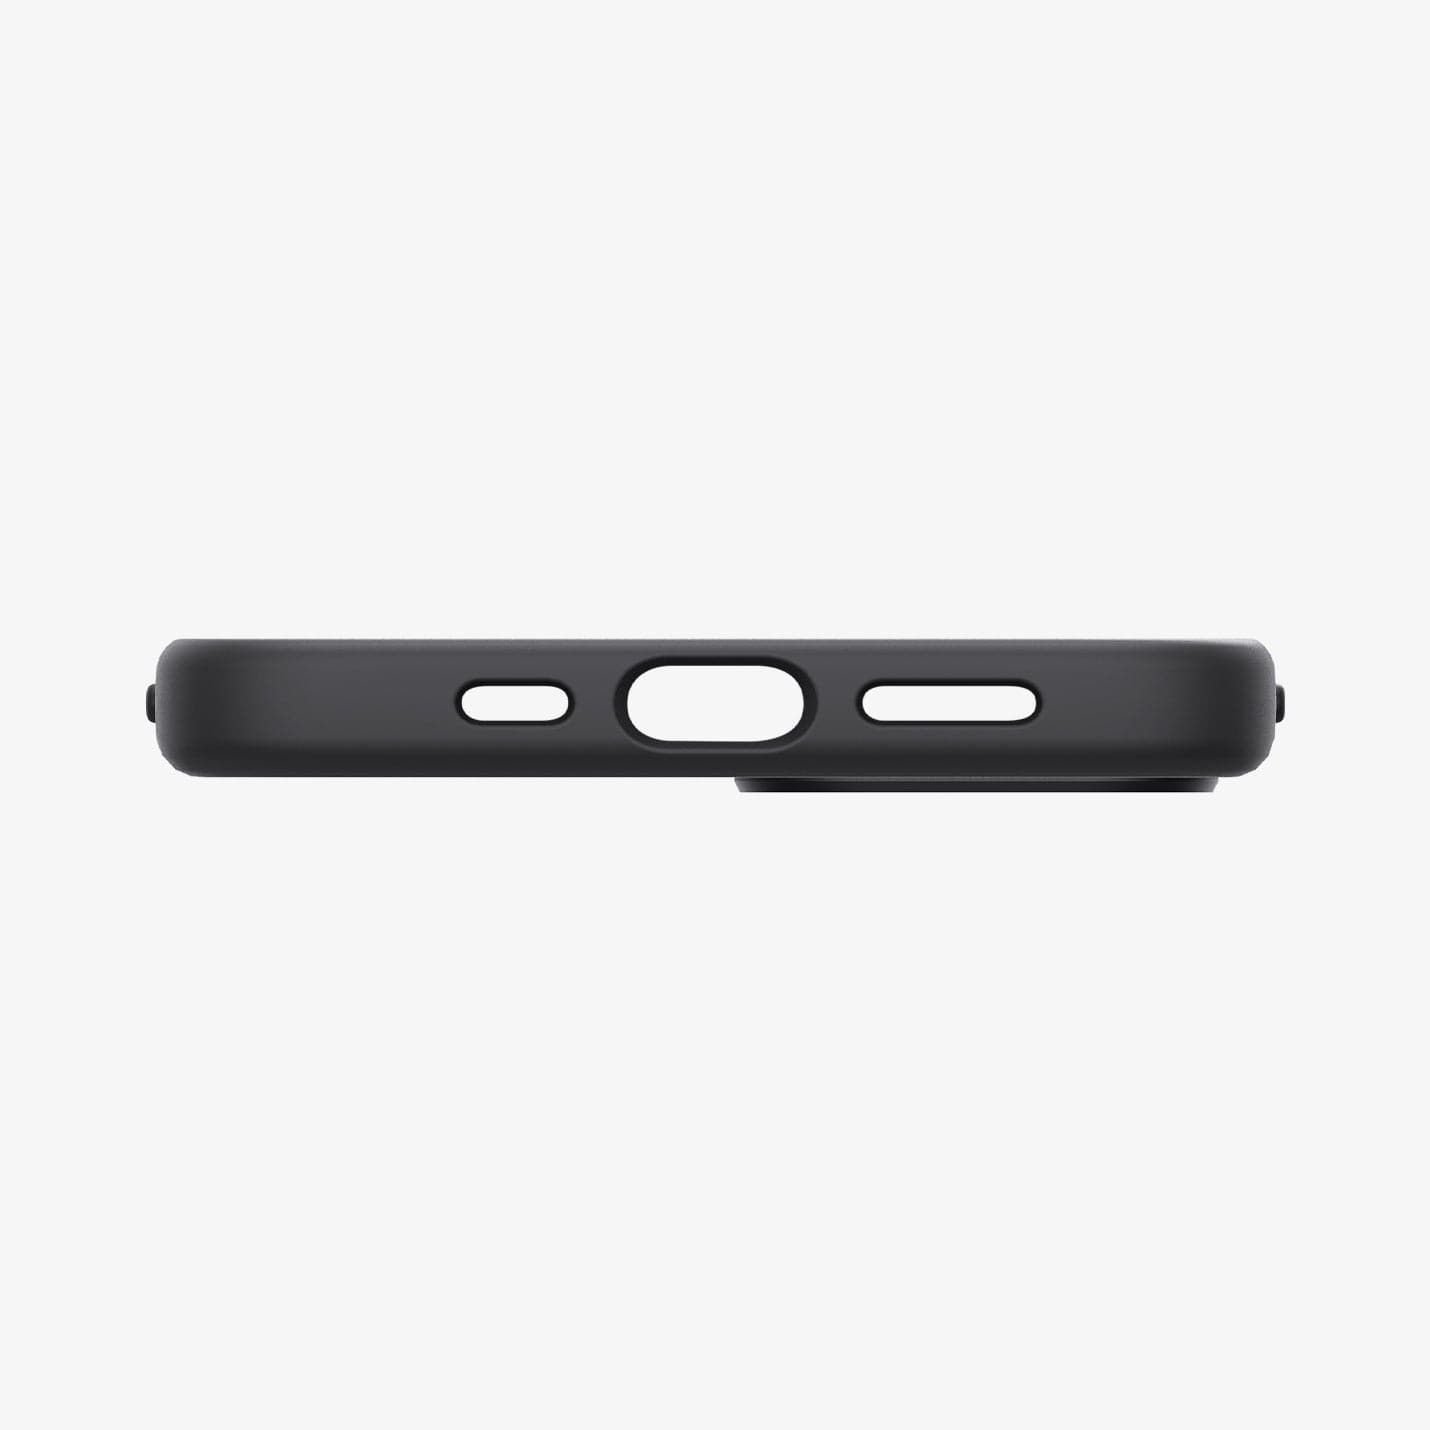 ACS04089 - iPhone 13 Case Silicone Fit MagSafe Compatible in black showing the bottom with precise cutouts